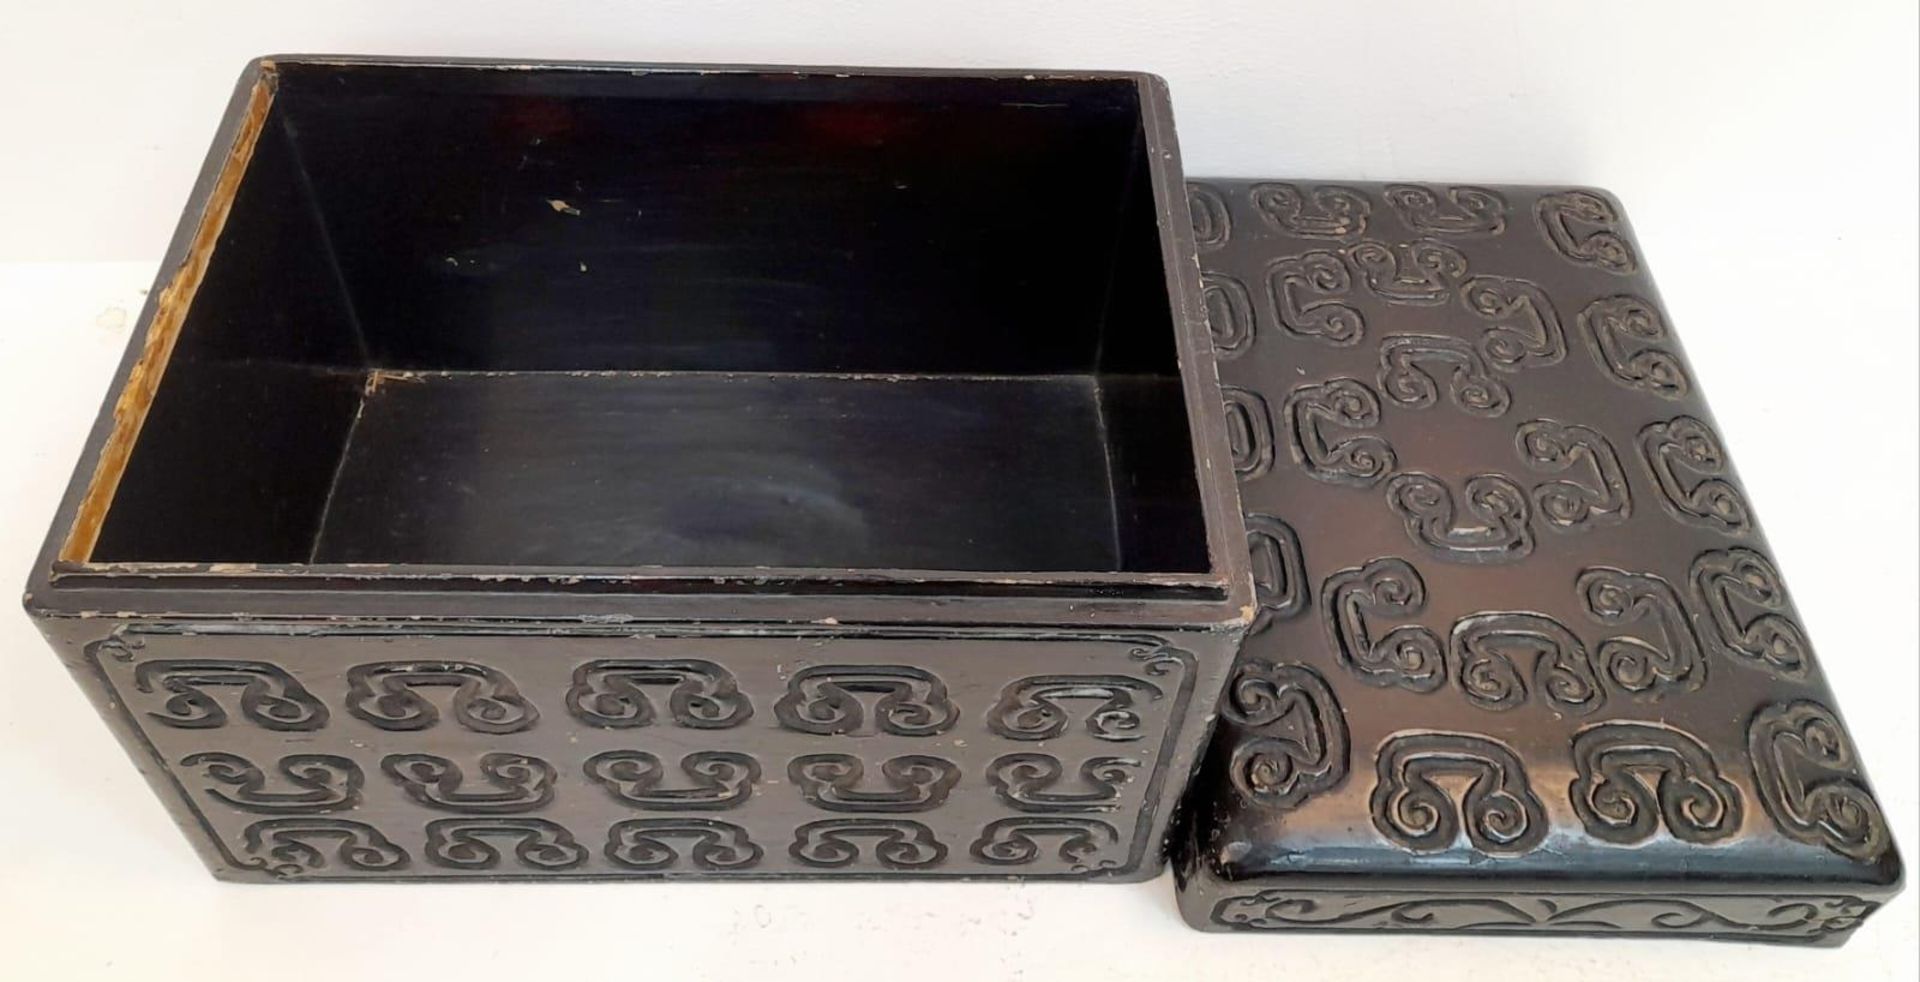 A Fascinating and Wonderful Antique Chinese Large Lacquered Box - 18th century, possibly earlier. - Image 4 of 7